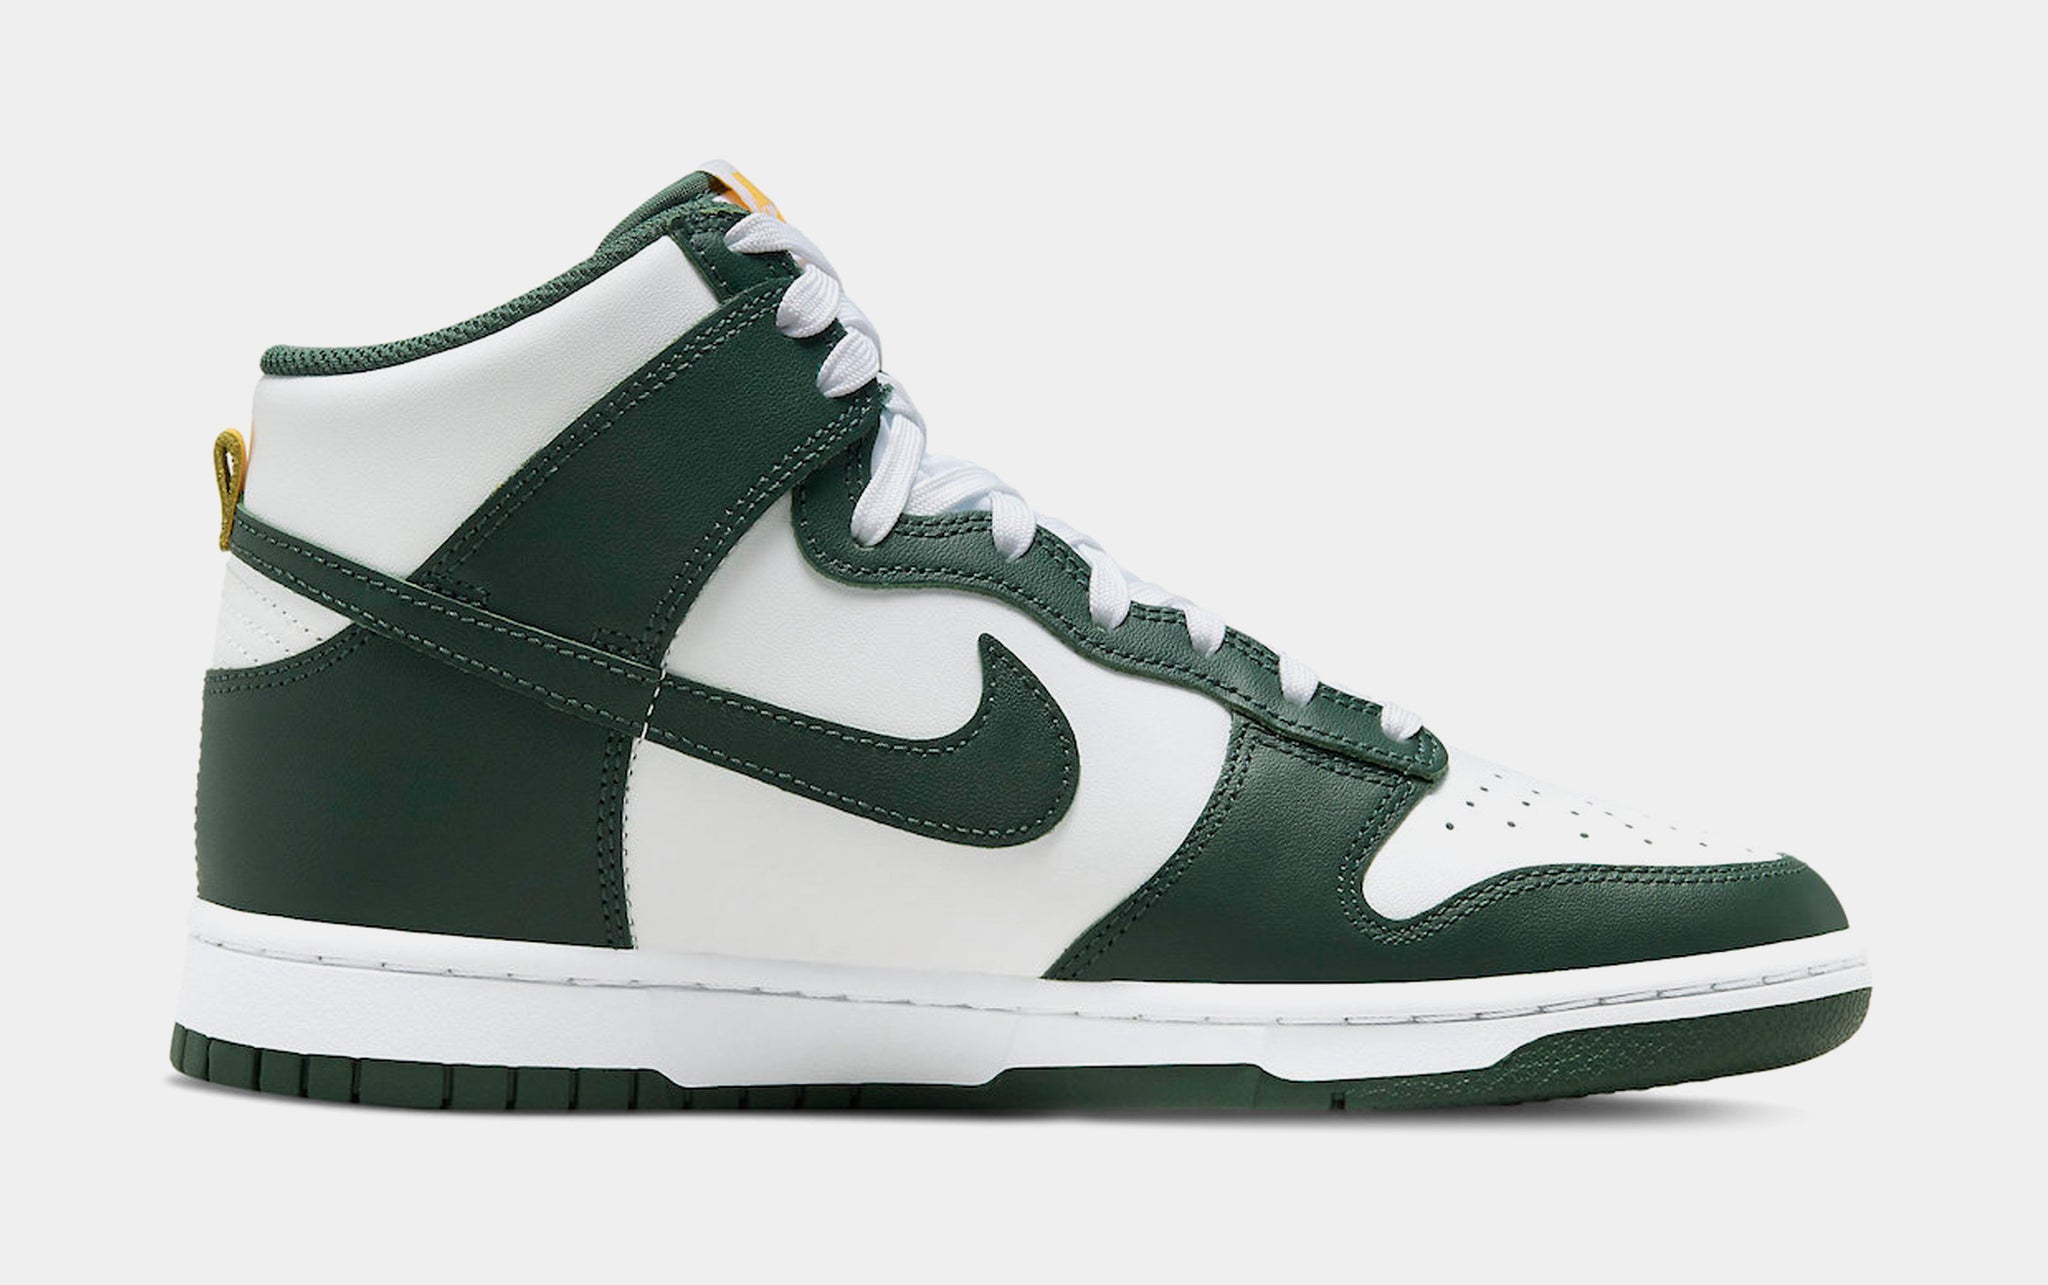 Nike Dunk High Noble Green Mens Lifestyle Shoes Green White Free